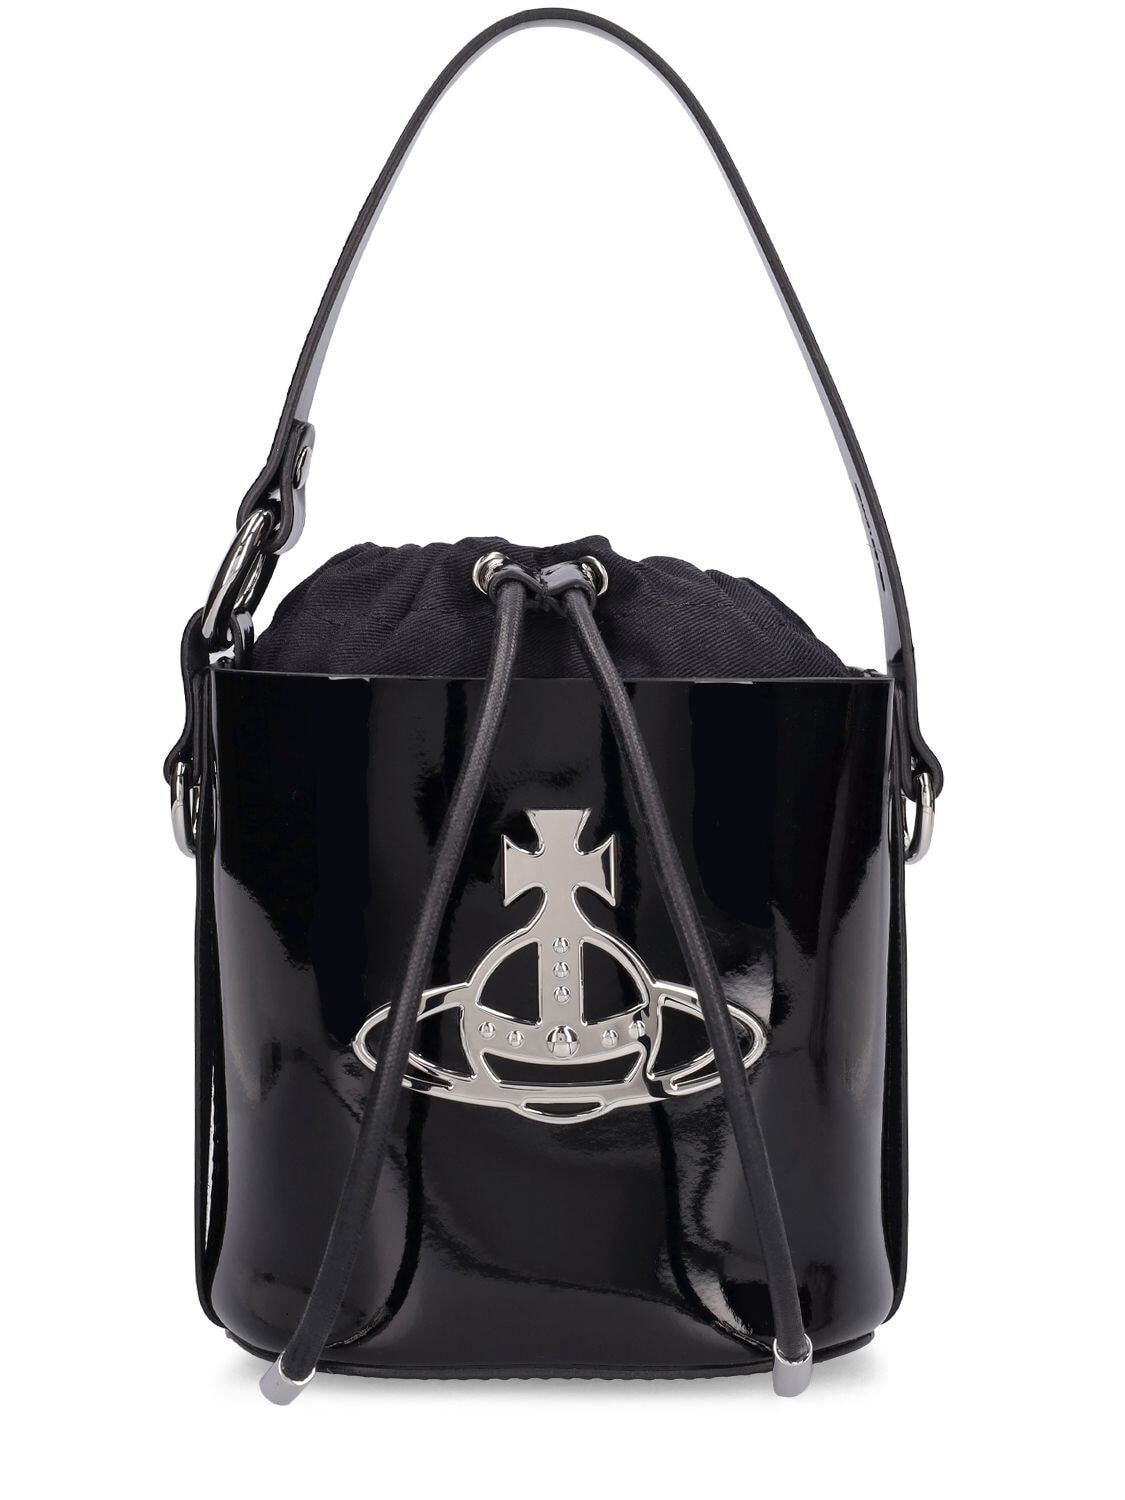 VIVIENNE WESTWOOD Small Daisy Patent Leather Bucket Bag in black